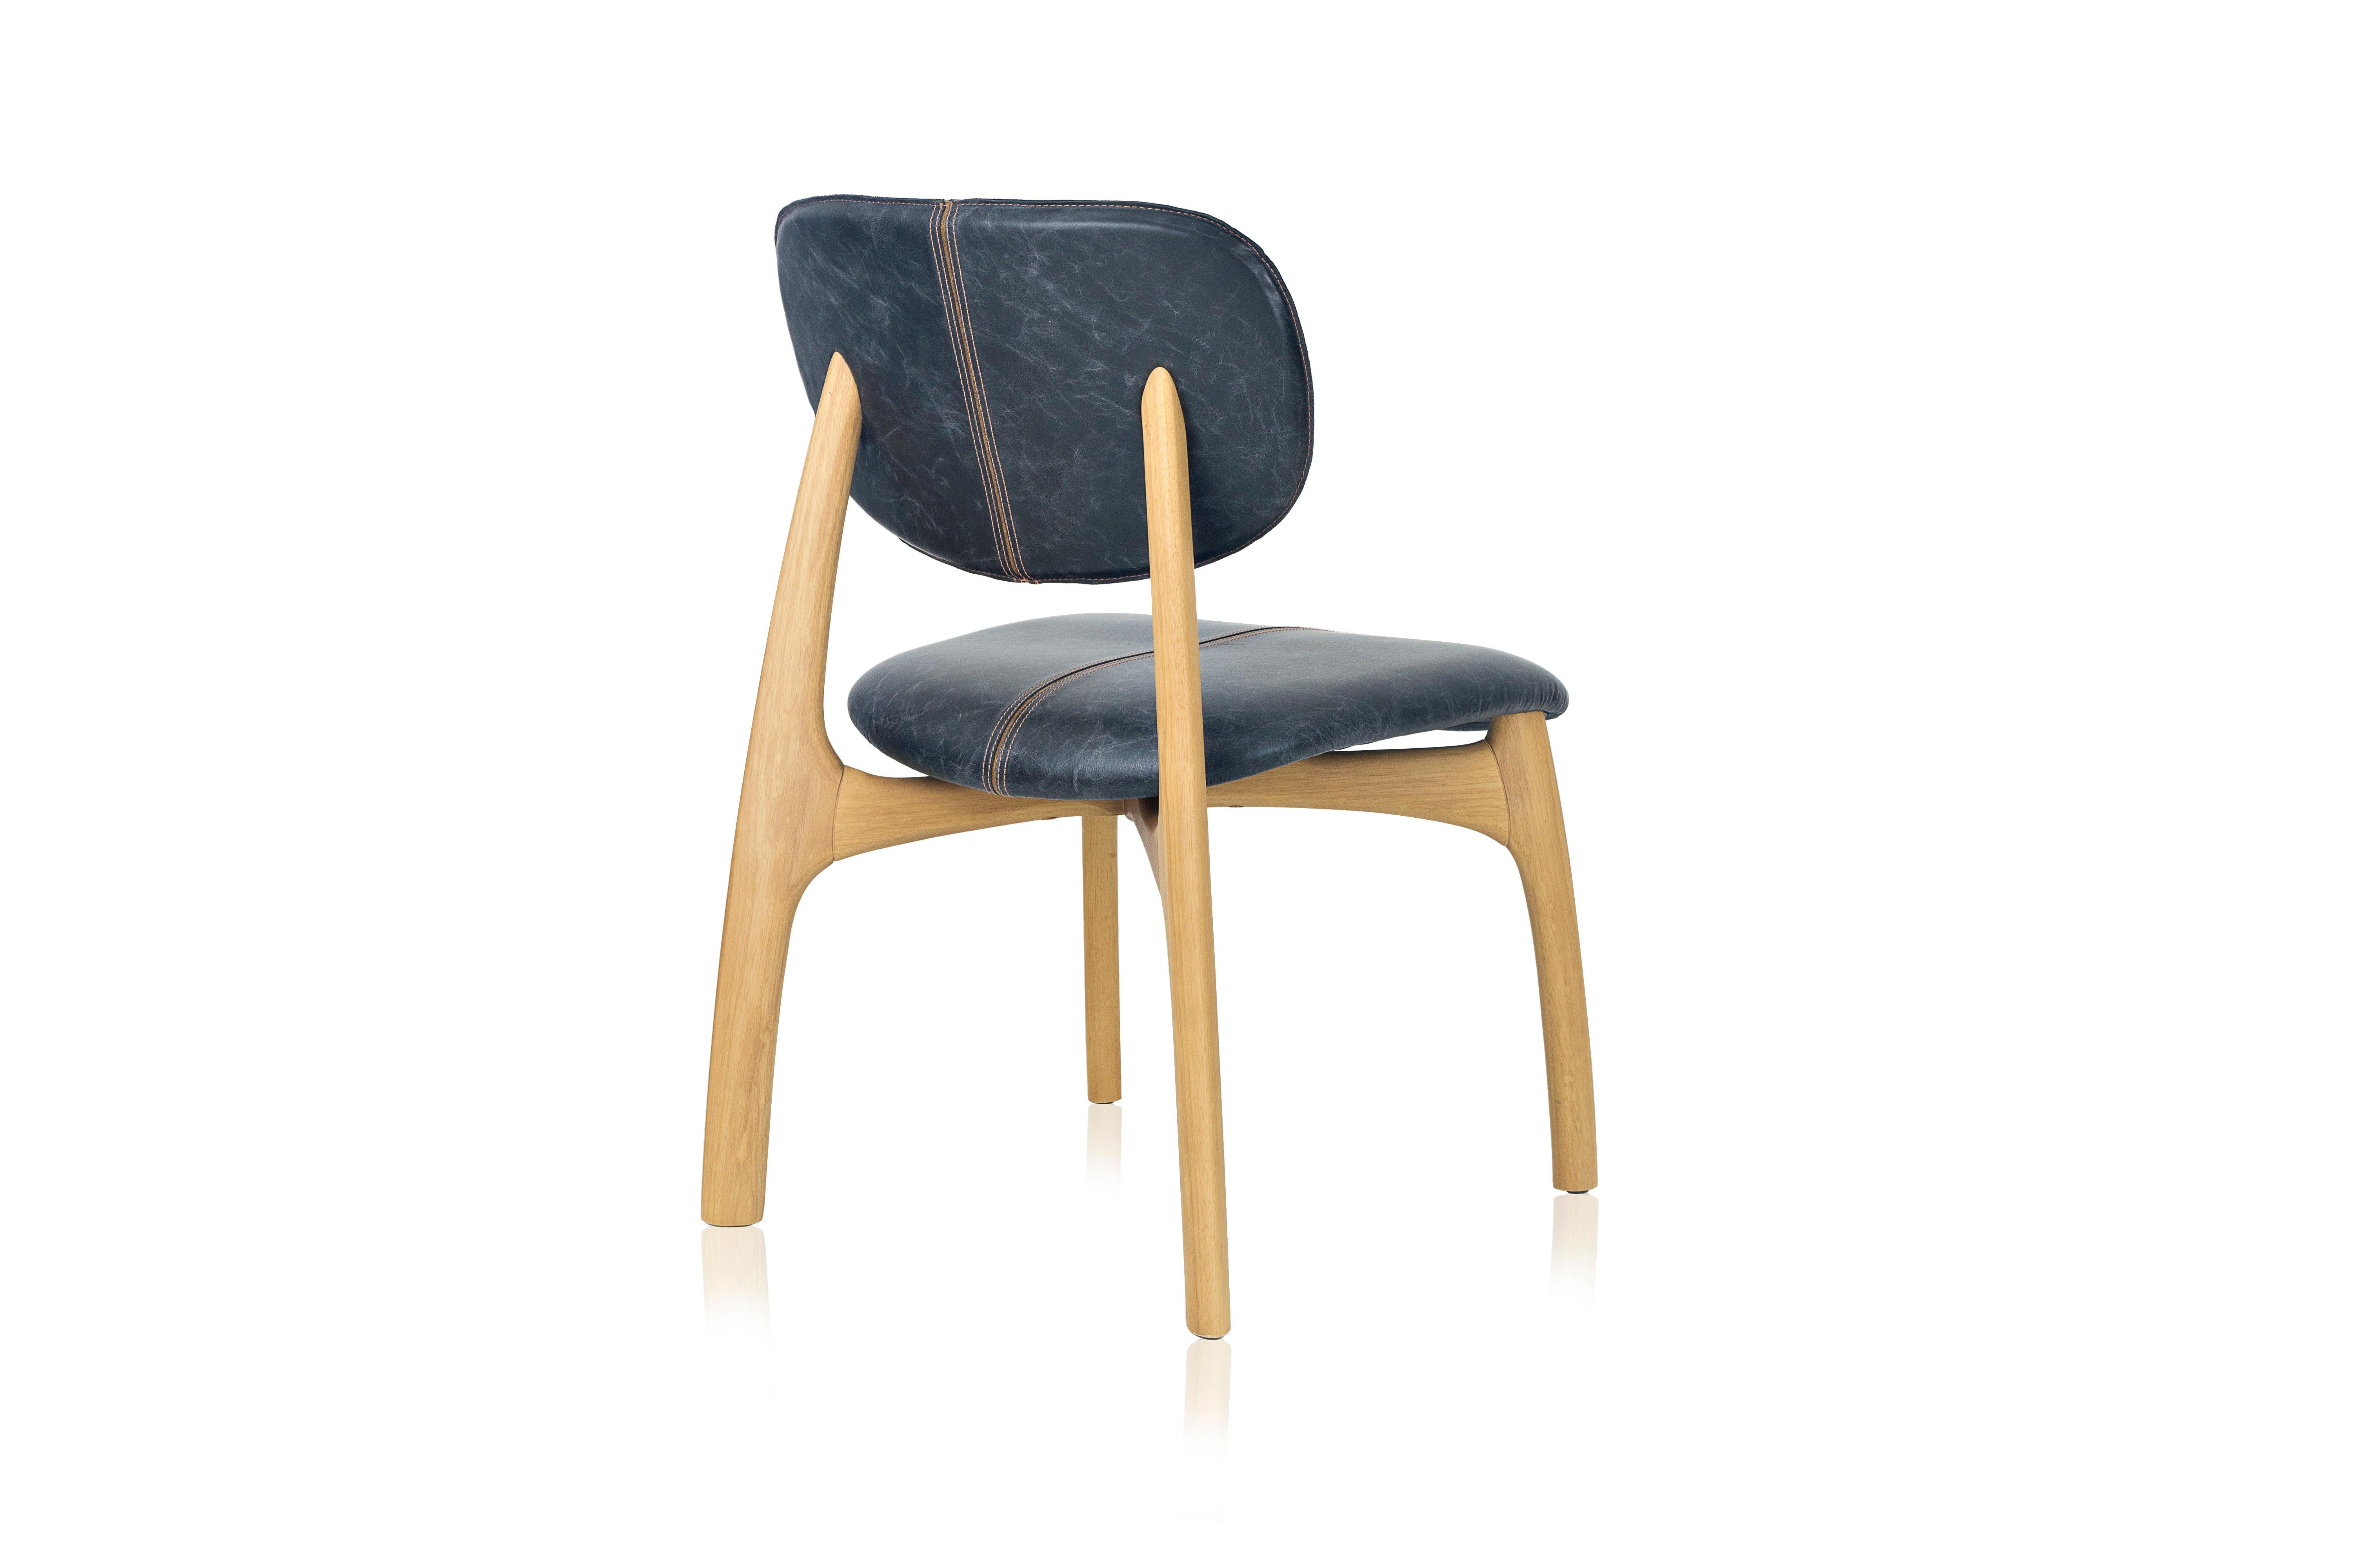 Surf Brazilian Contemporary Wood and Leather Chair by Lattoog In New Condition For Sale In Sao Paolo, BR